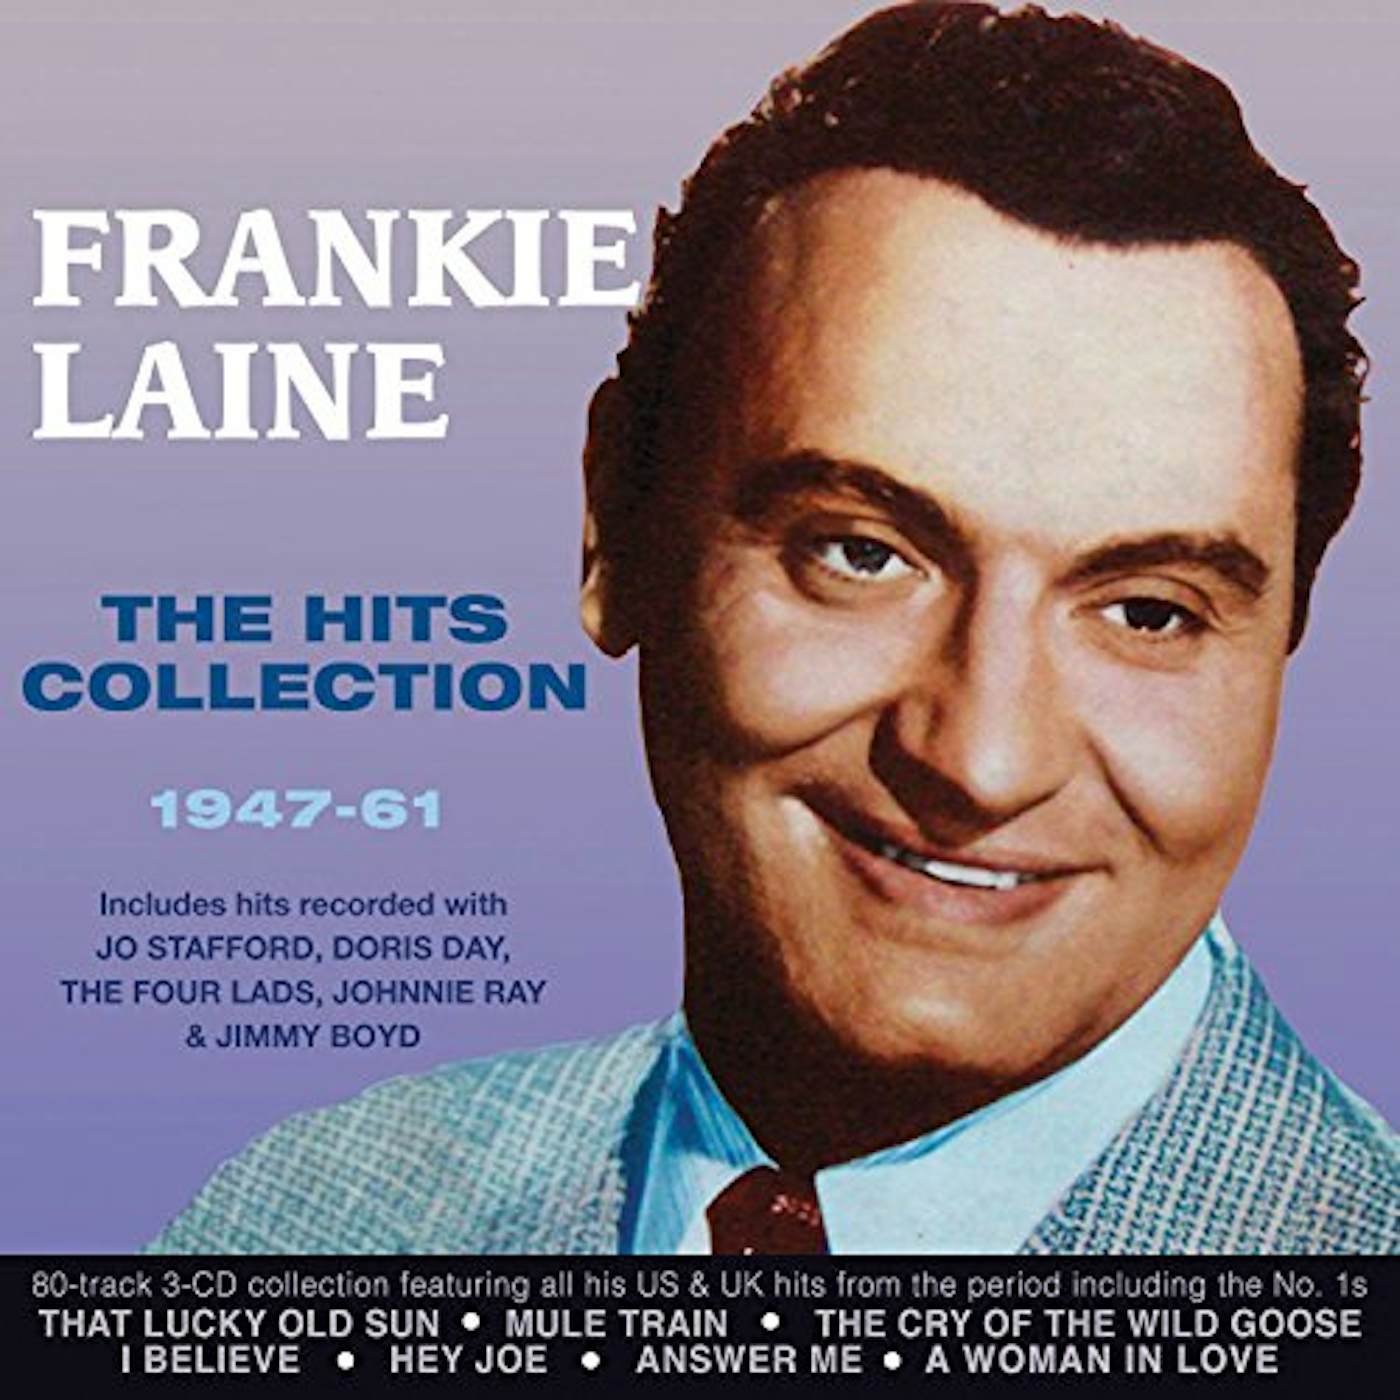 Frankie Laine HITS COLLECTION 1947-61 CD